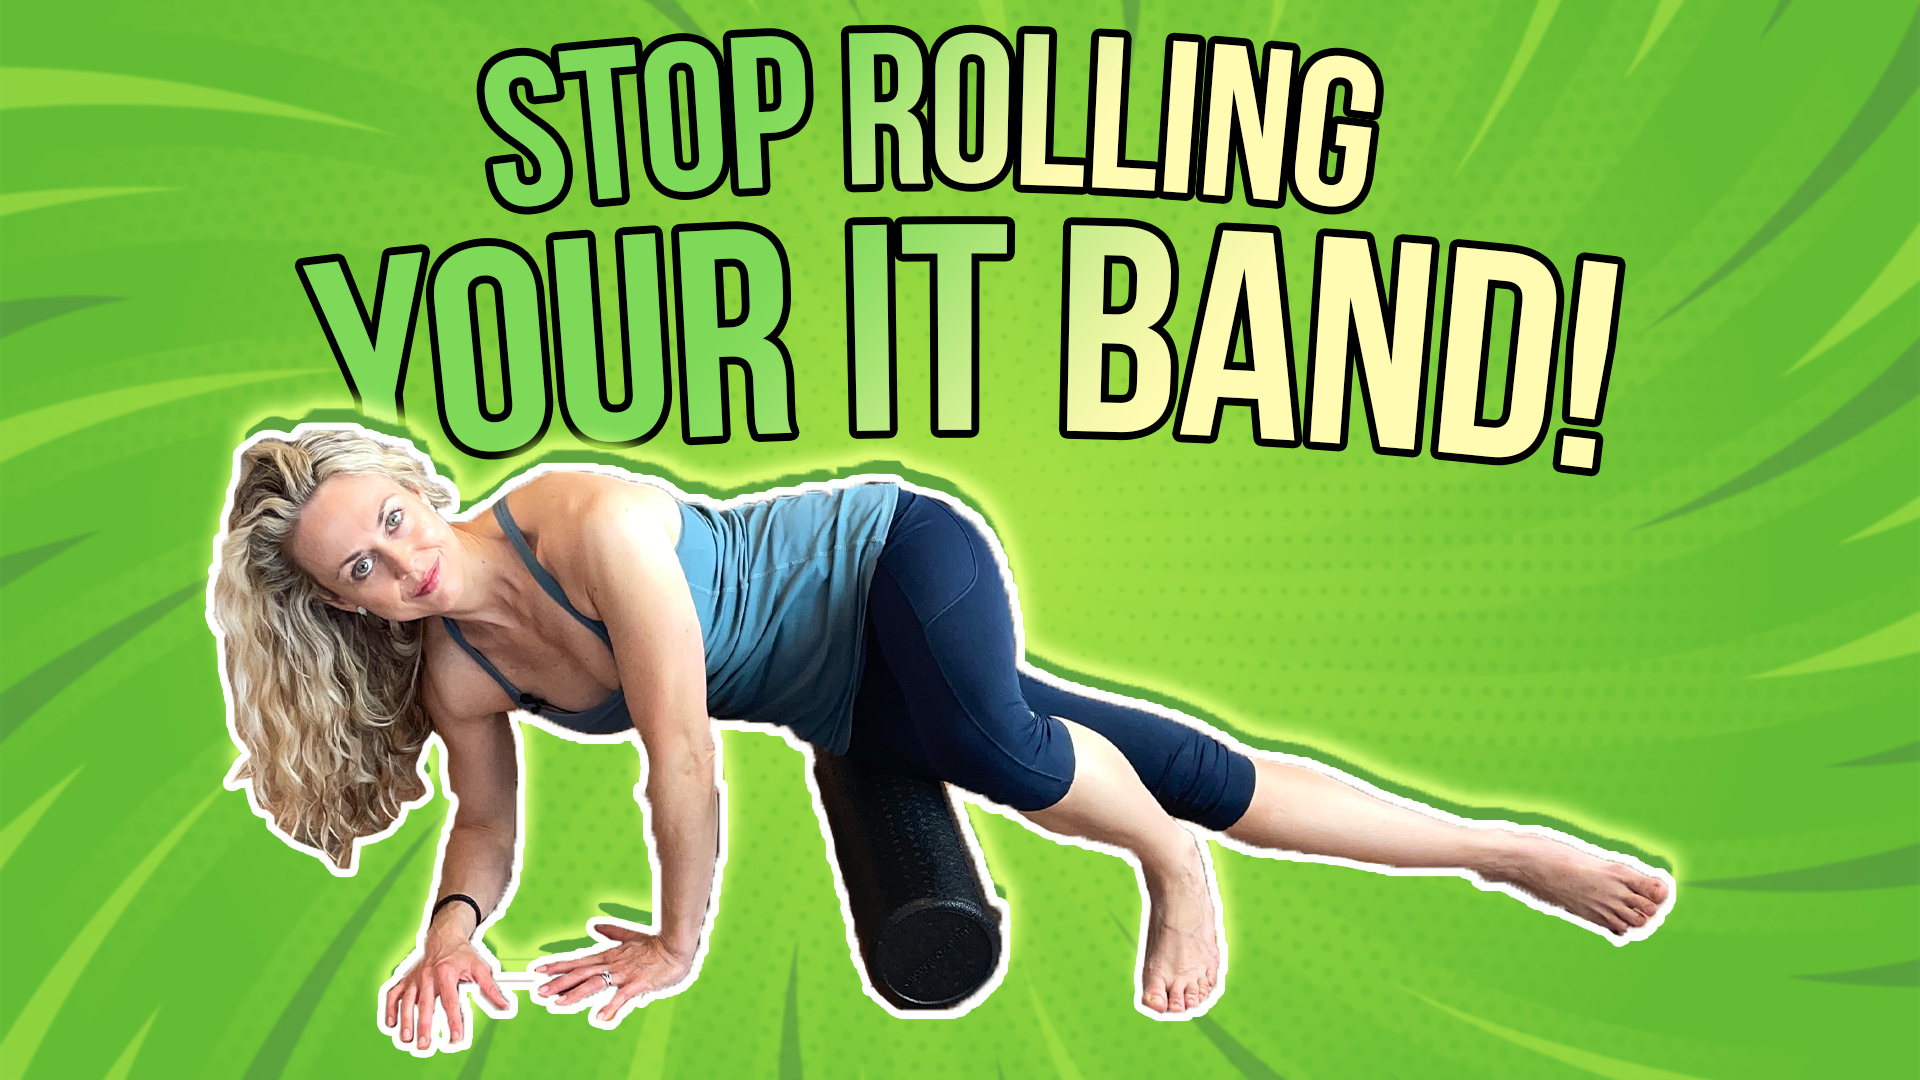 STOP rolling your IT Band!